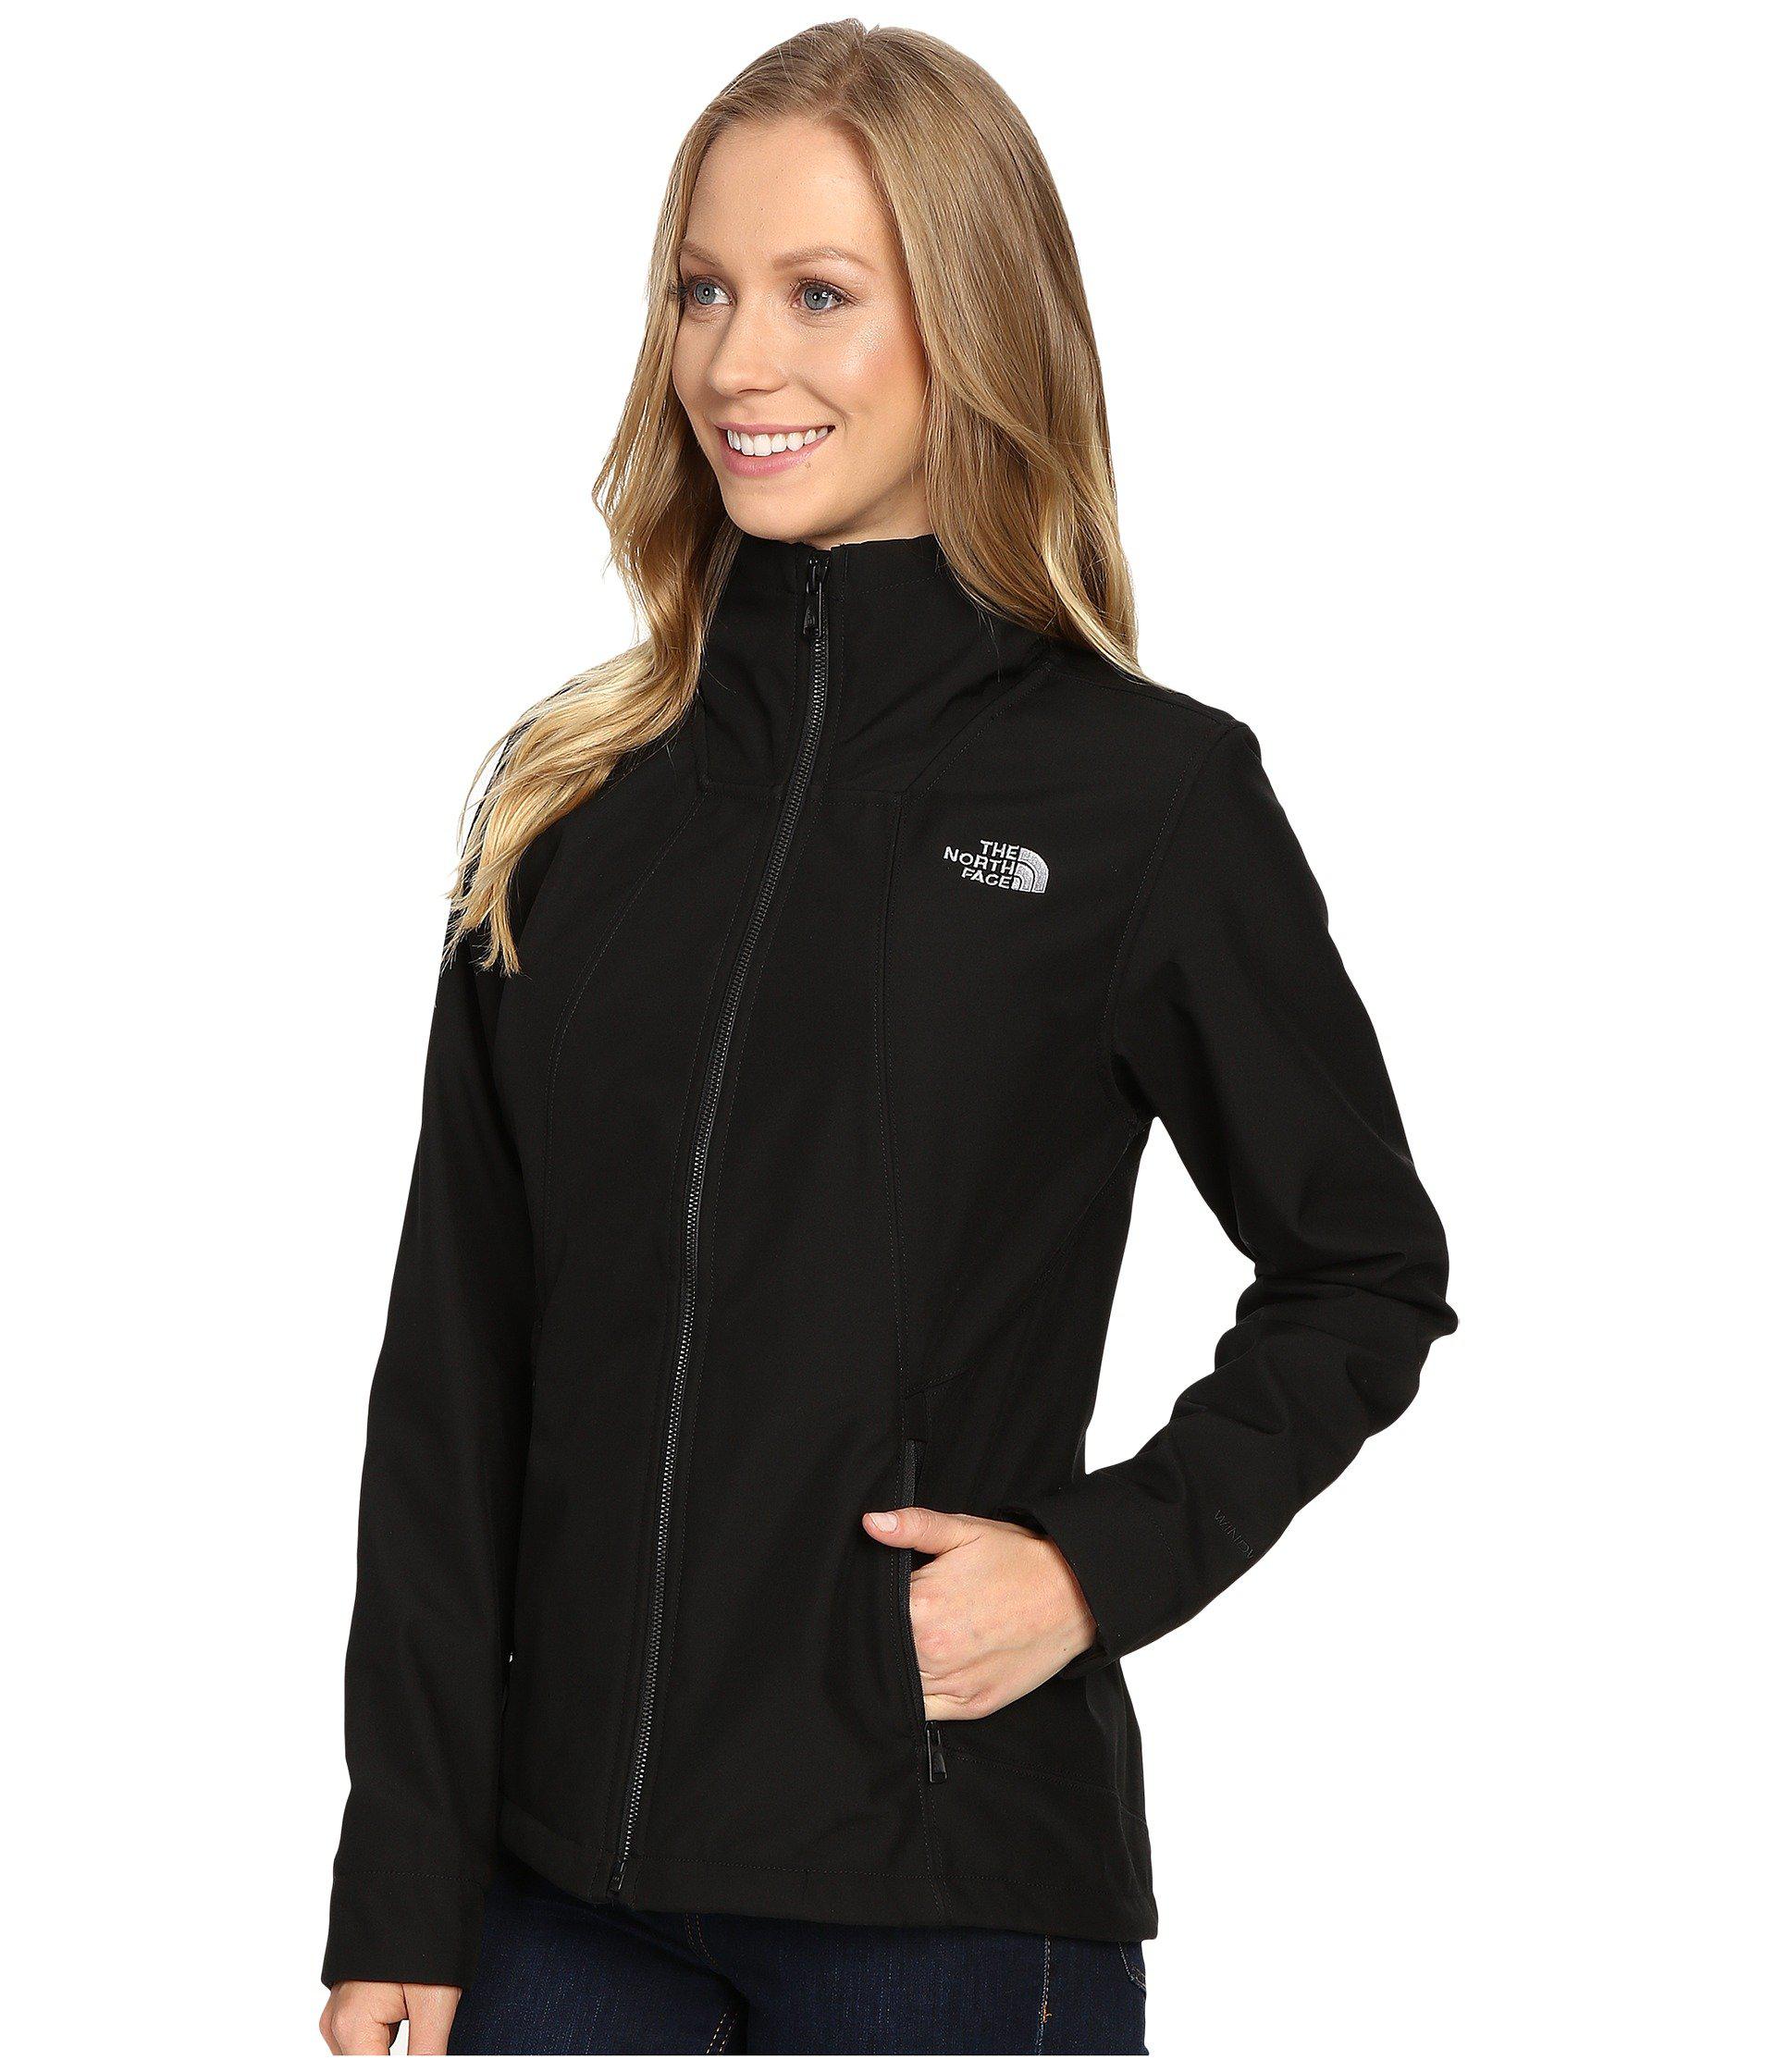 north face thermal fleece